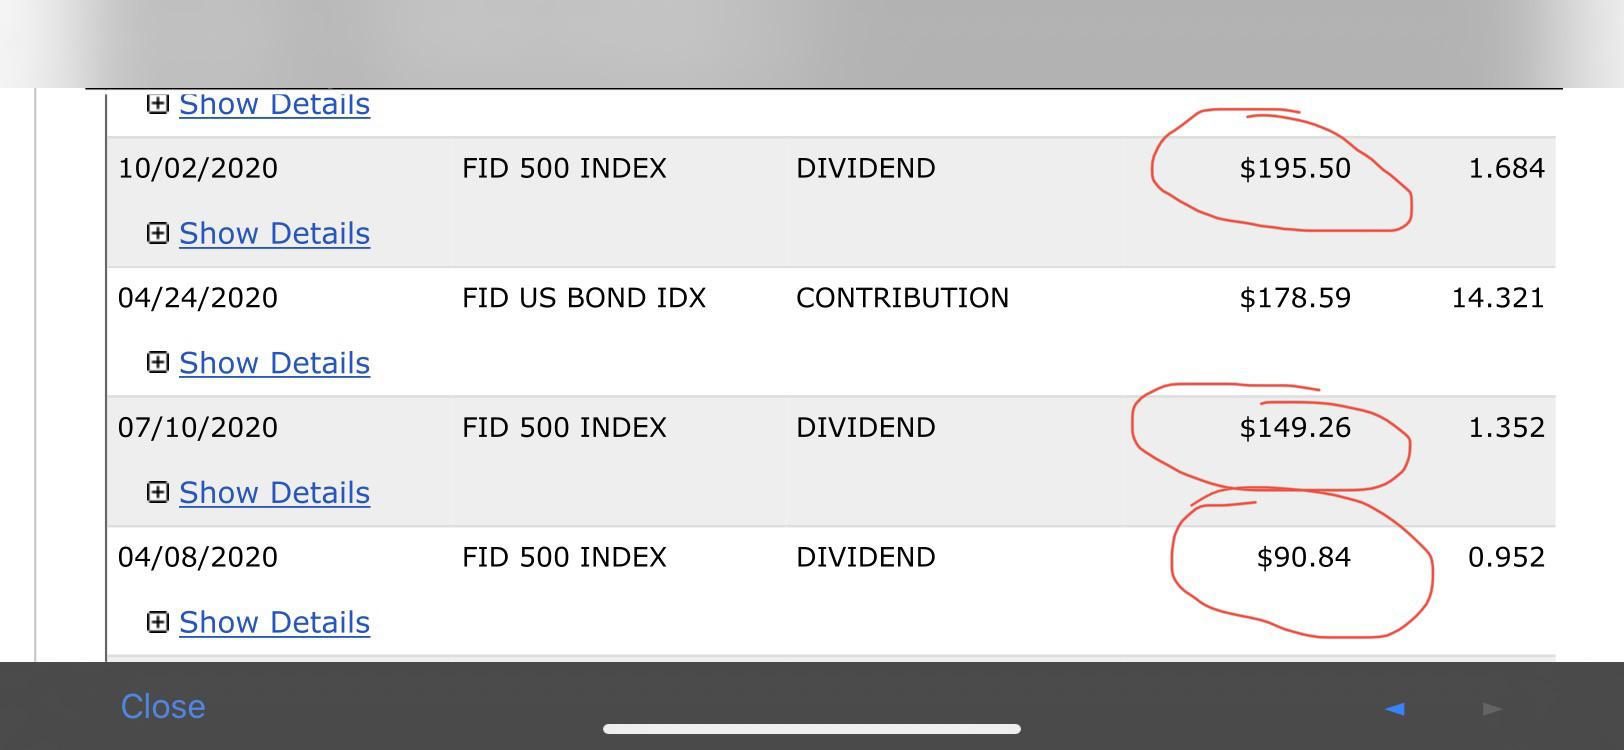 When Does FXAIX Pay Dividends?